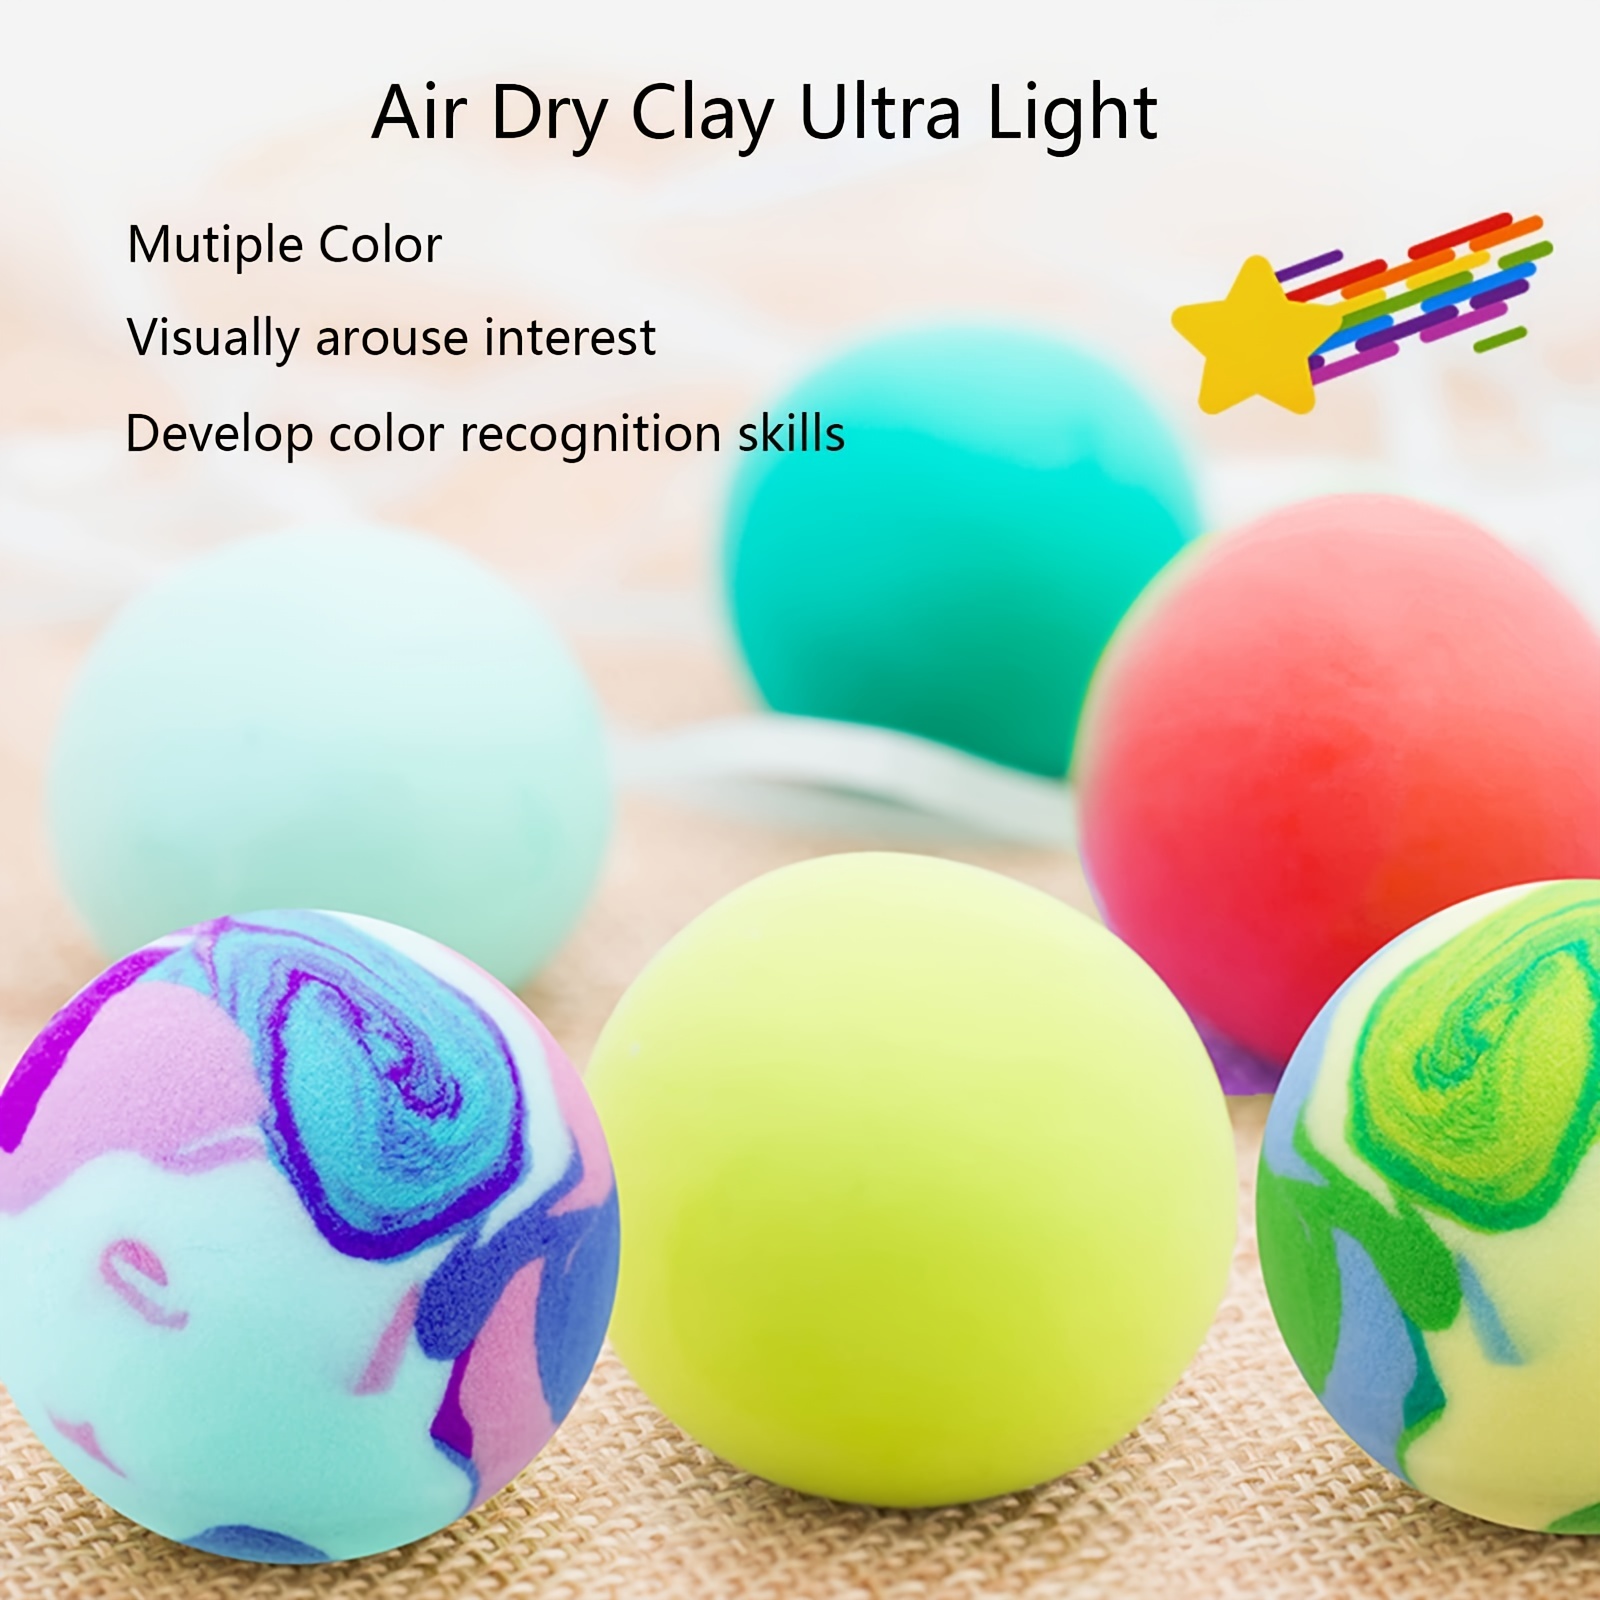 Snagshout, Modeling clay - Air Dry Clay for Kids, Air Dry Clay Kit with  Clay Tools, Model Magic Clay for Craft and Kids Activities